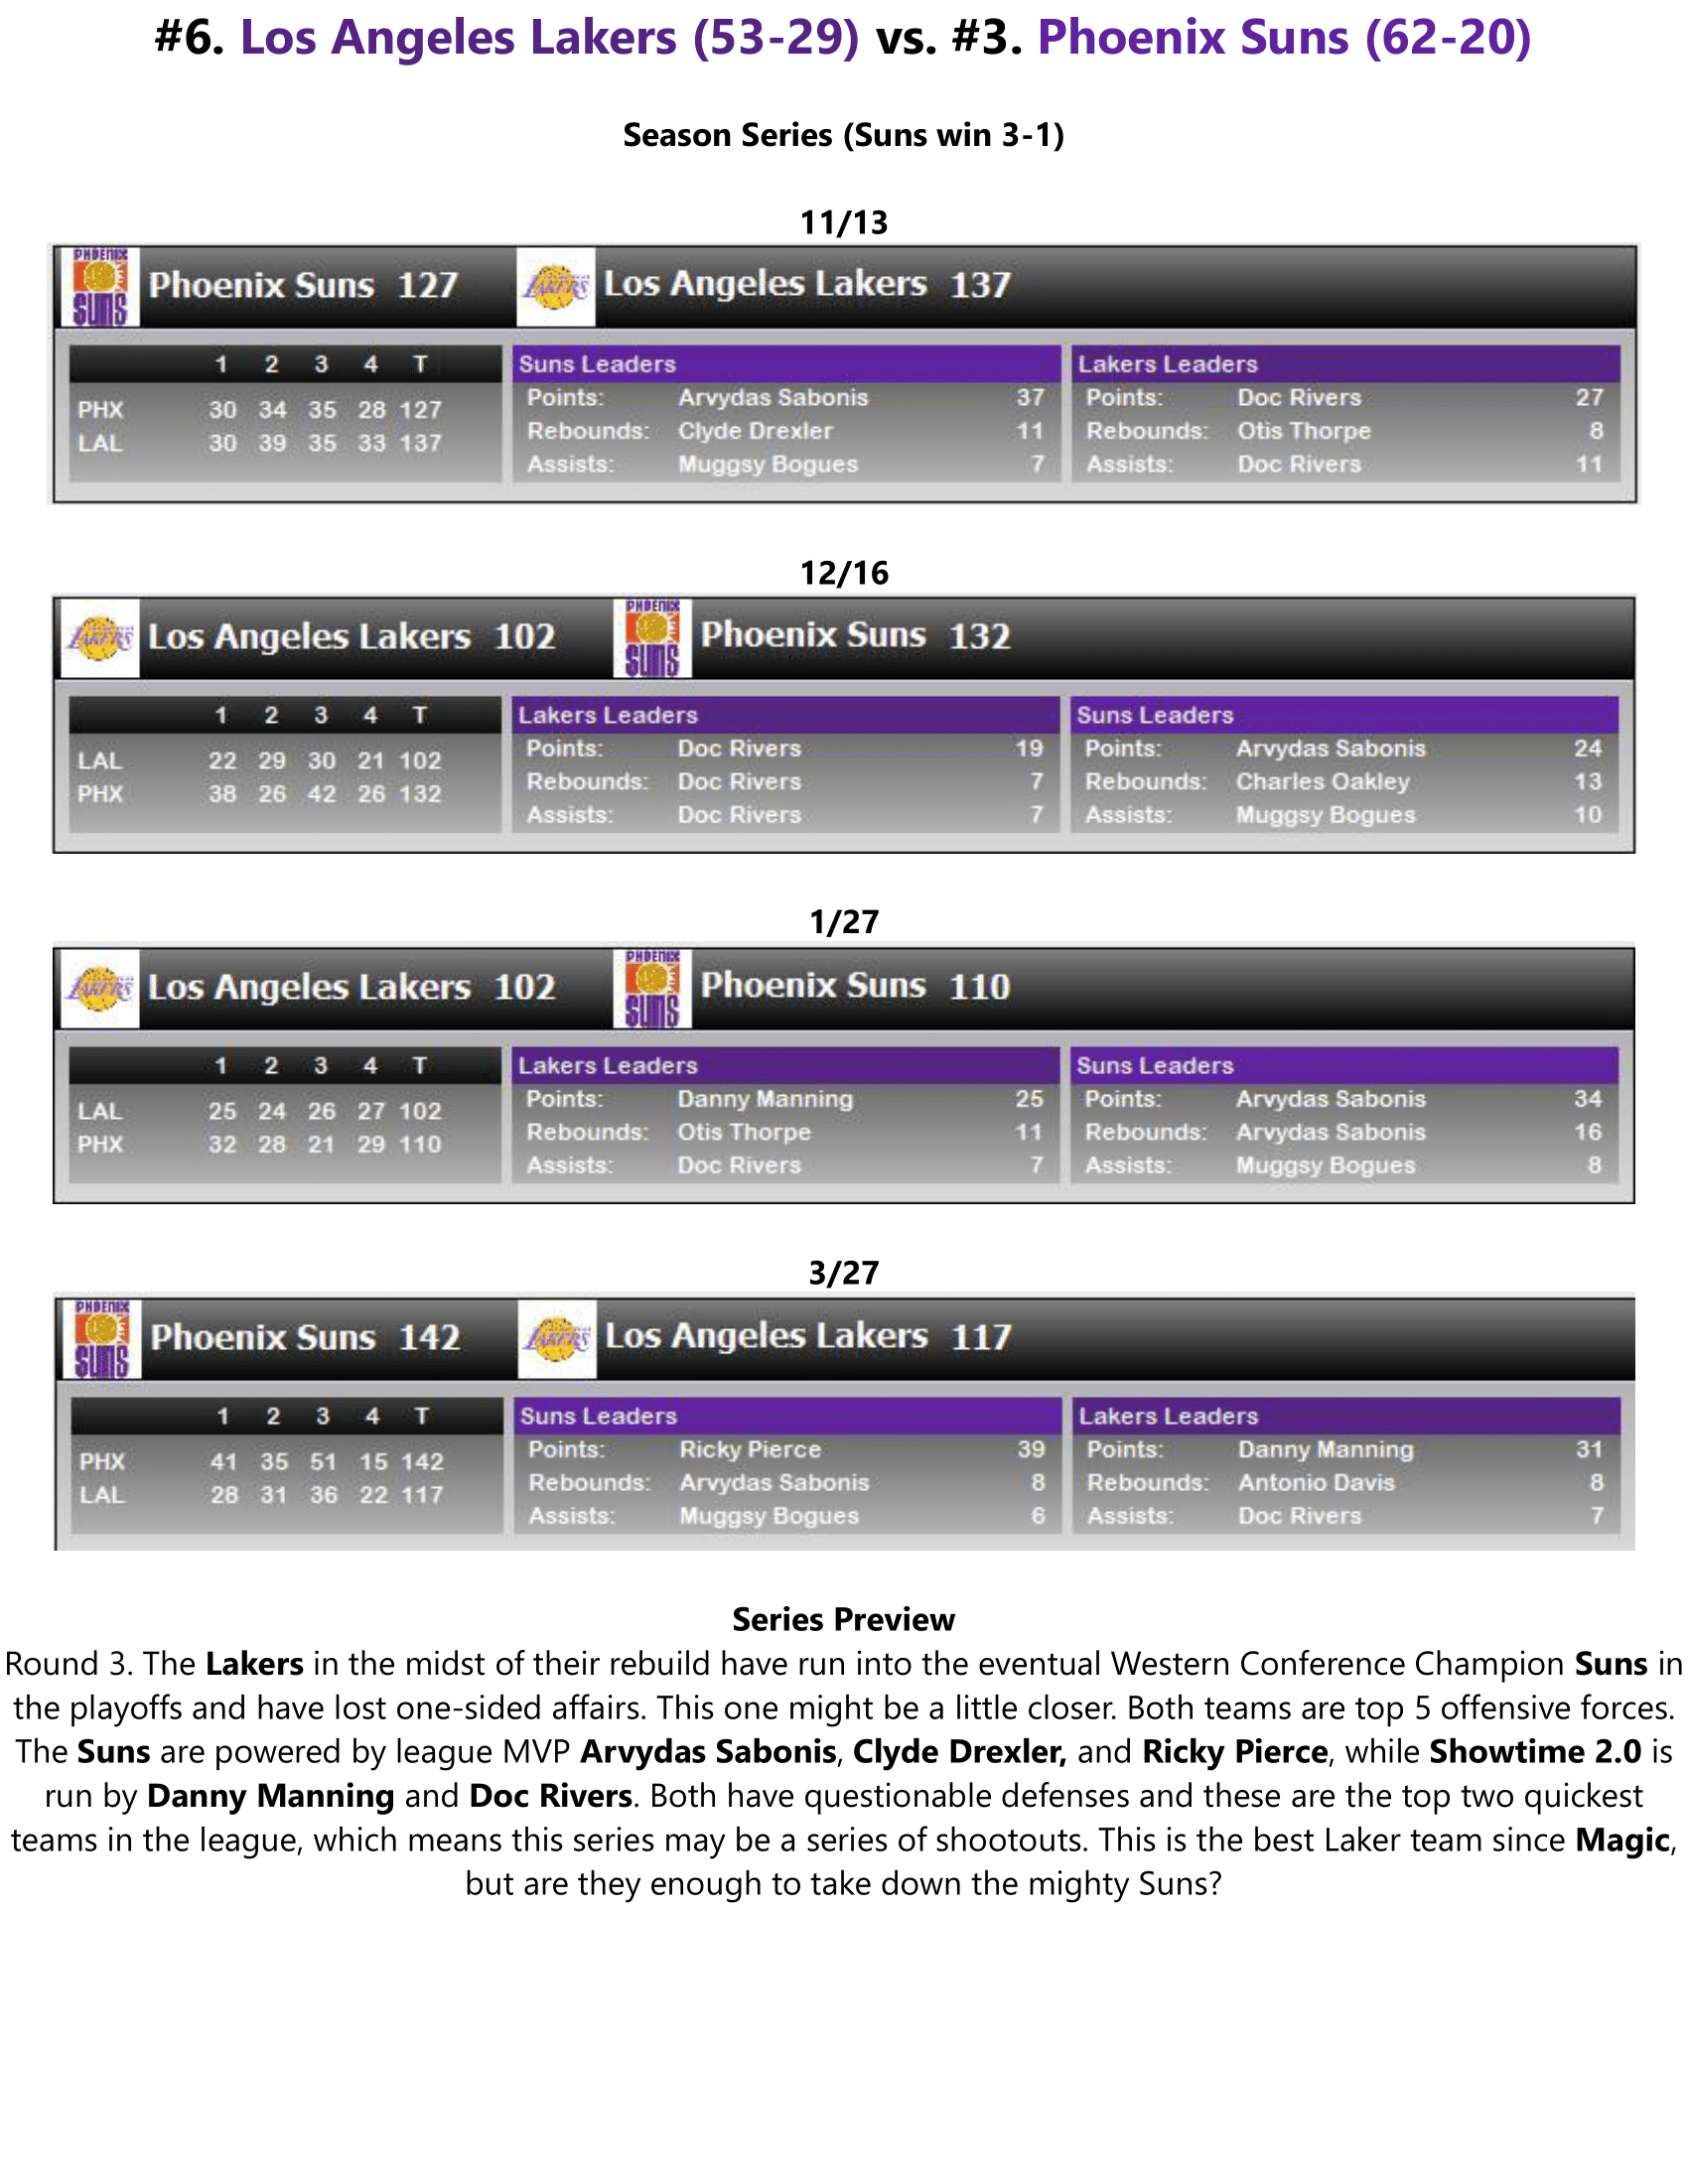 90-91-Part-4-Playoff-Preview-Round-1-06.png